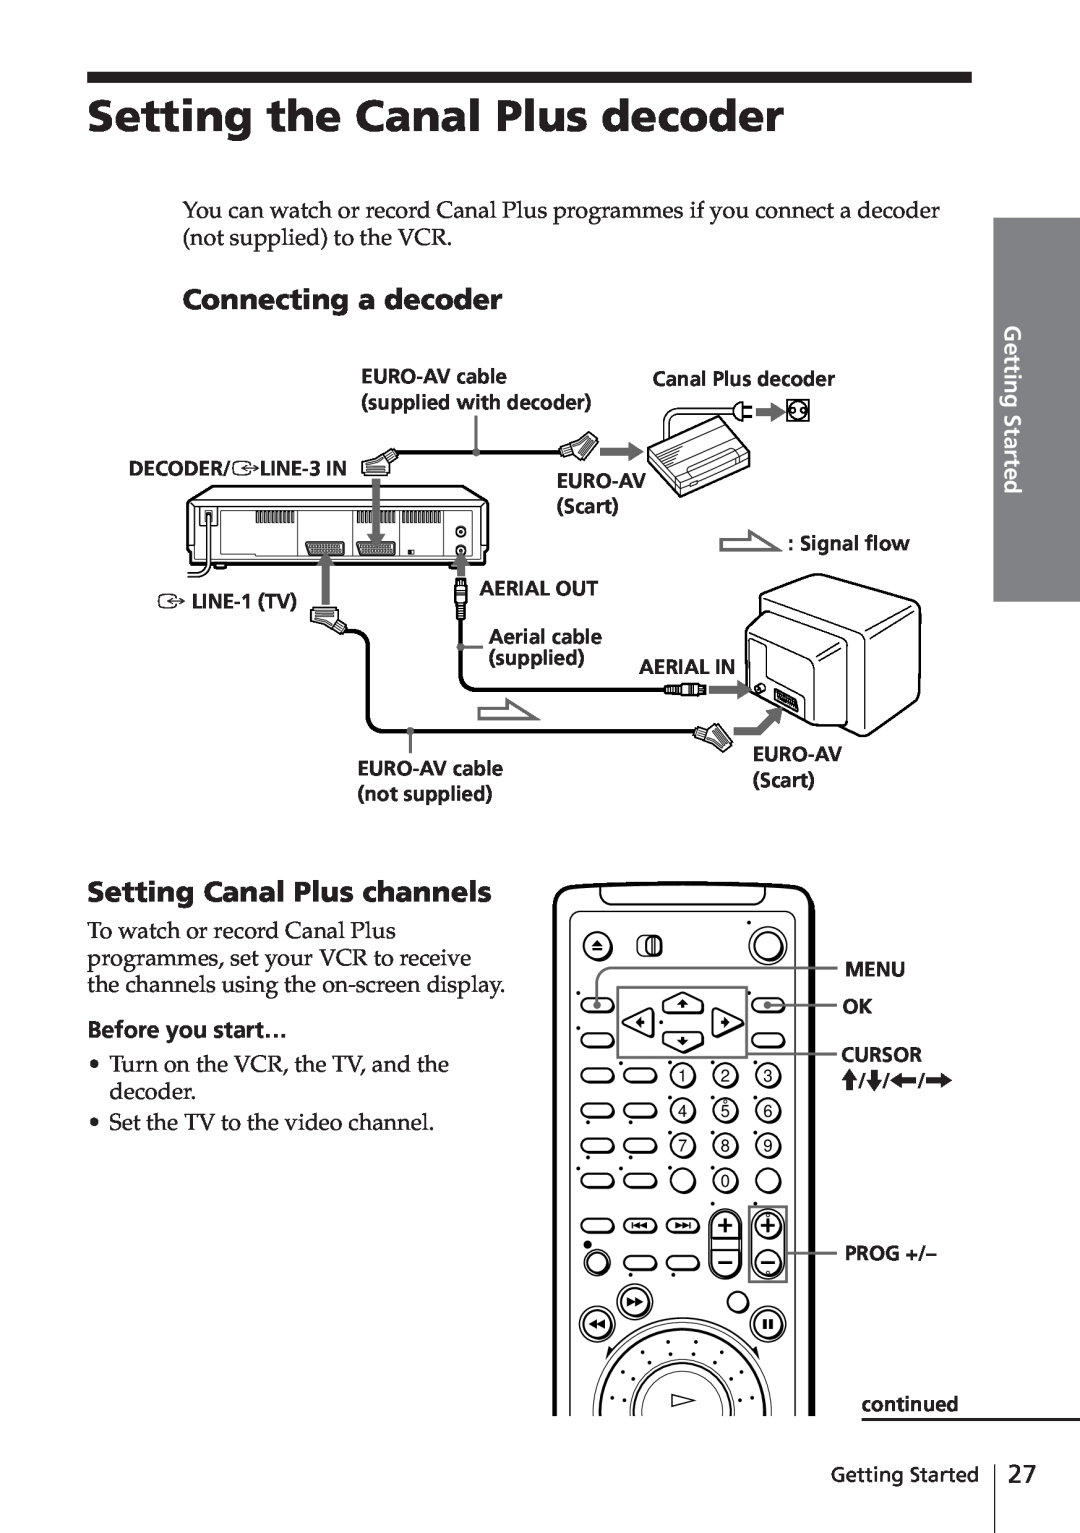 Sony SLV-E580EG manual Setting the Canal Plus decoder, Connecting a decoder, Setting Canal Plus channels, Getting Started 